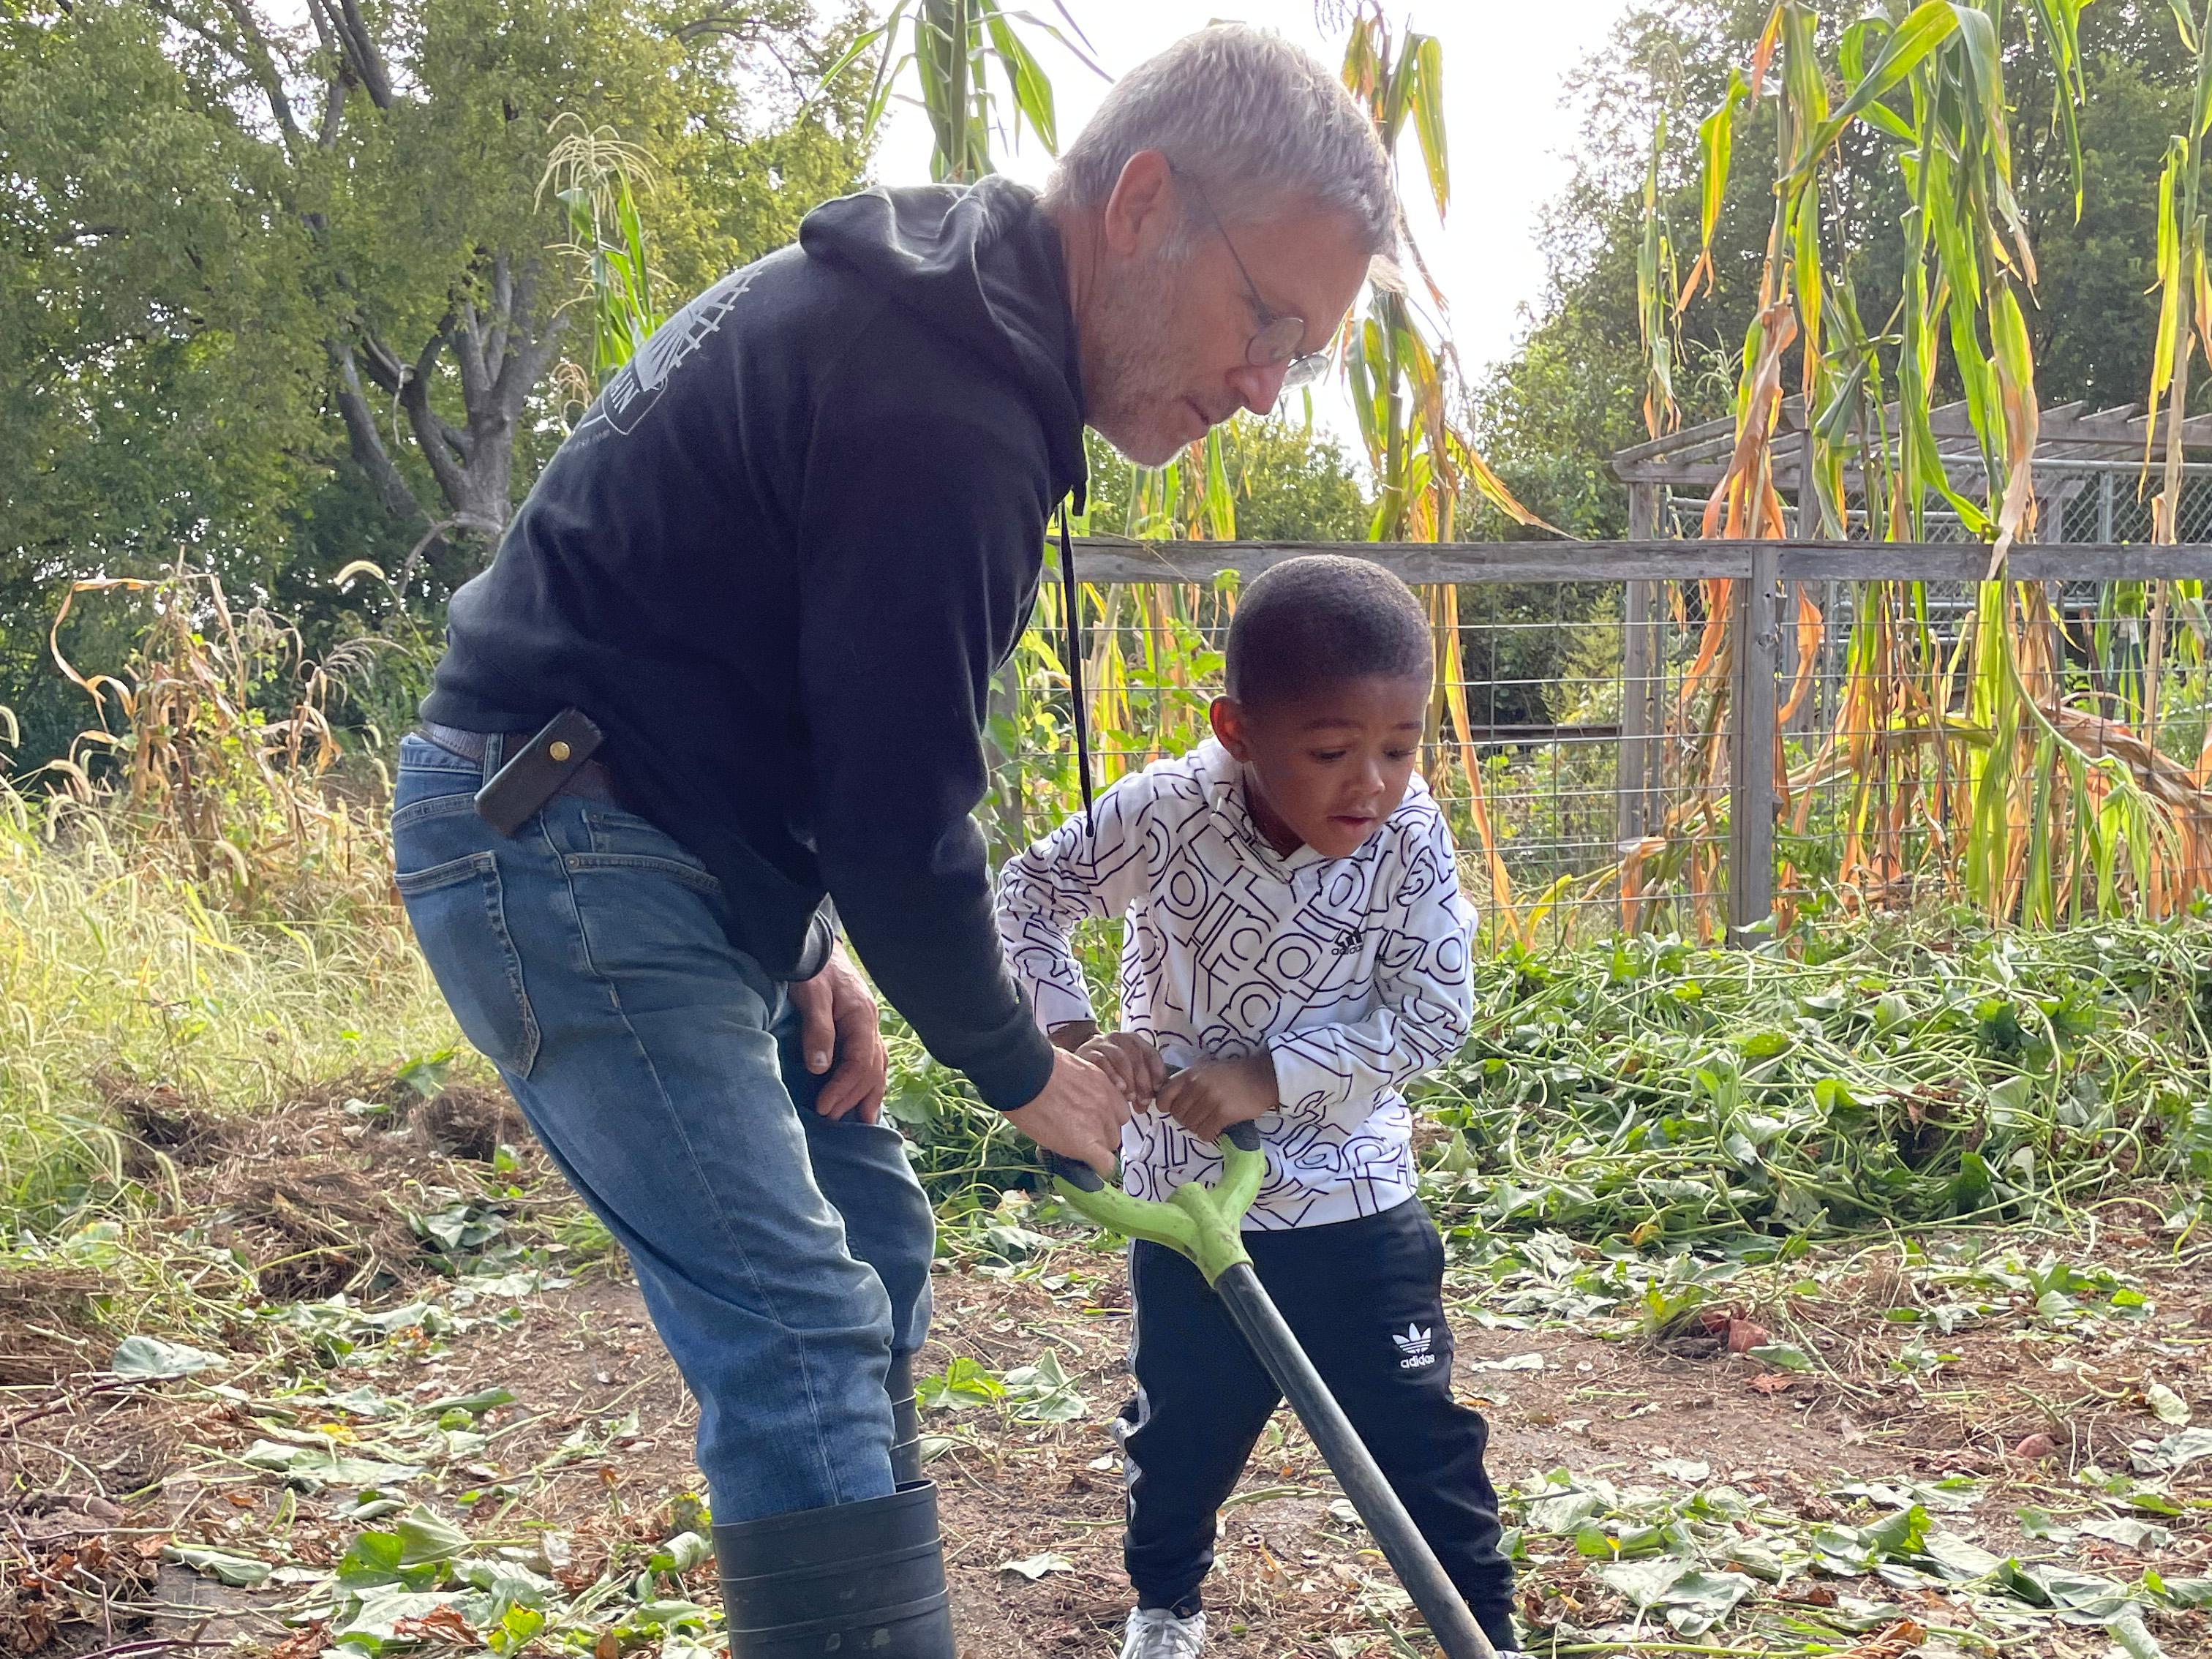 Adult Helping Child with Shovel